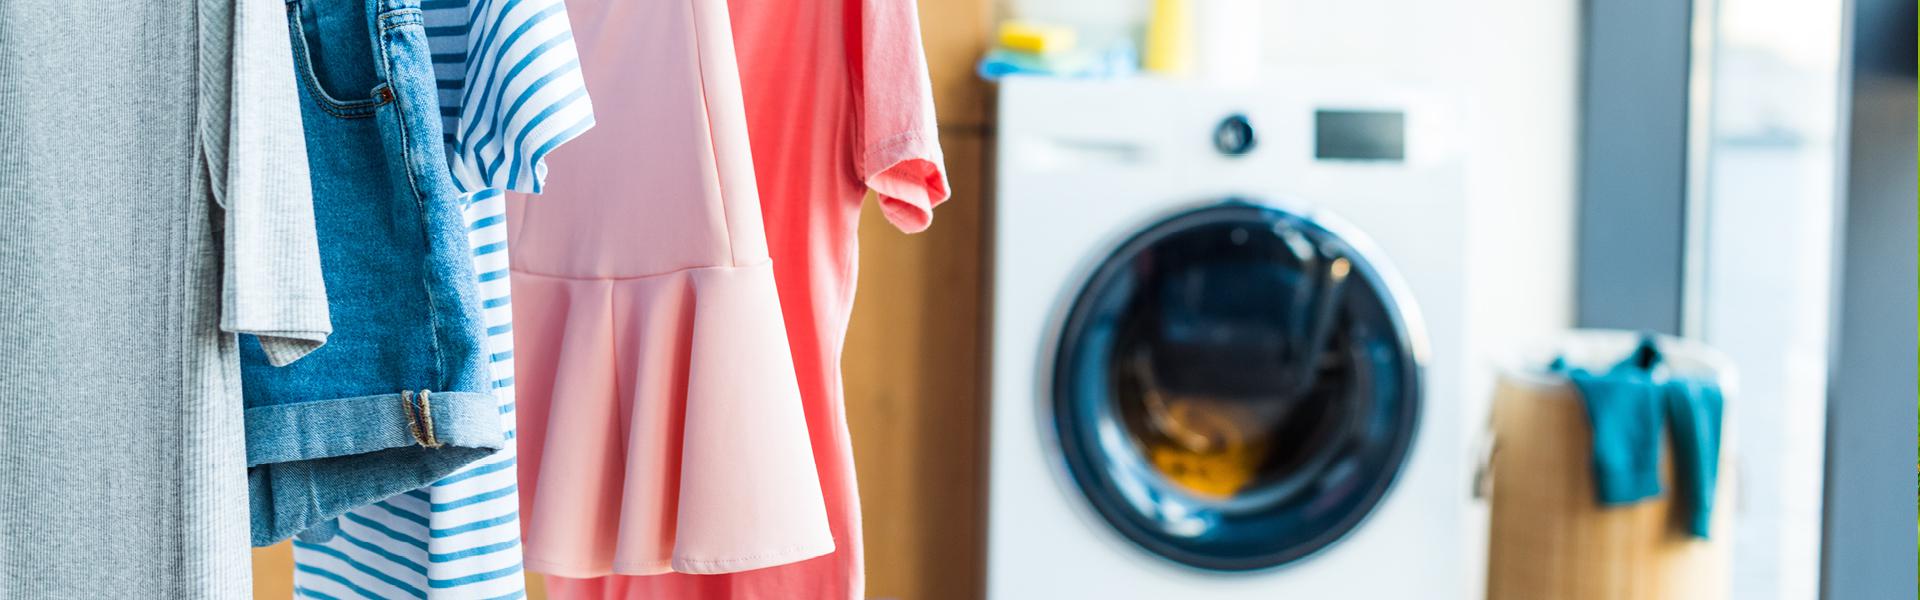 Image of Washing Machine and Clothes